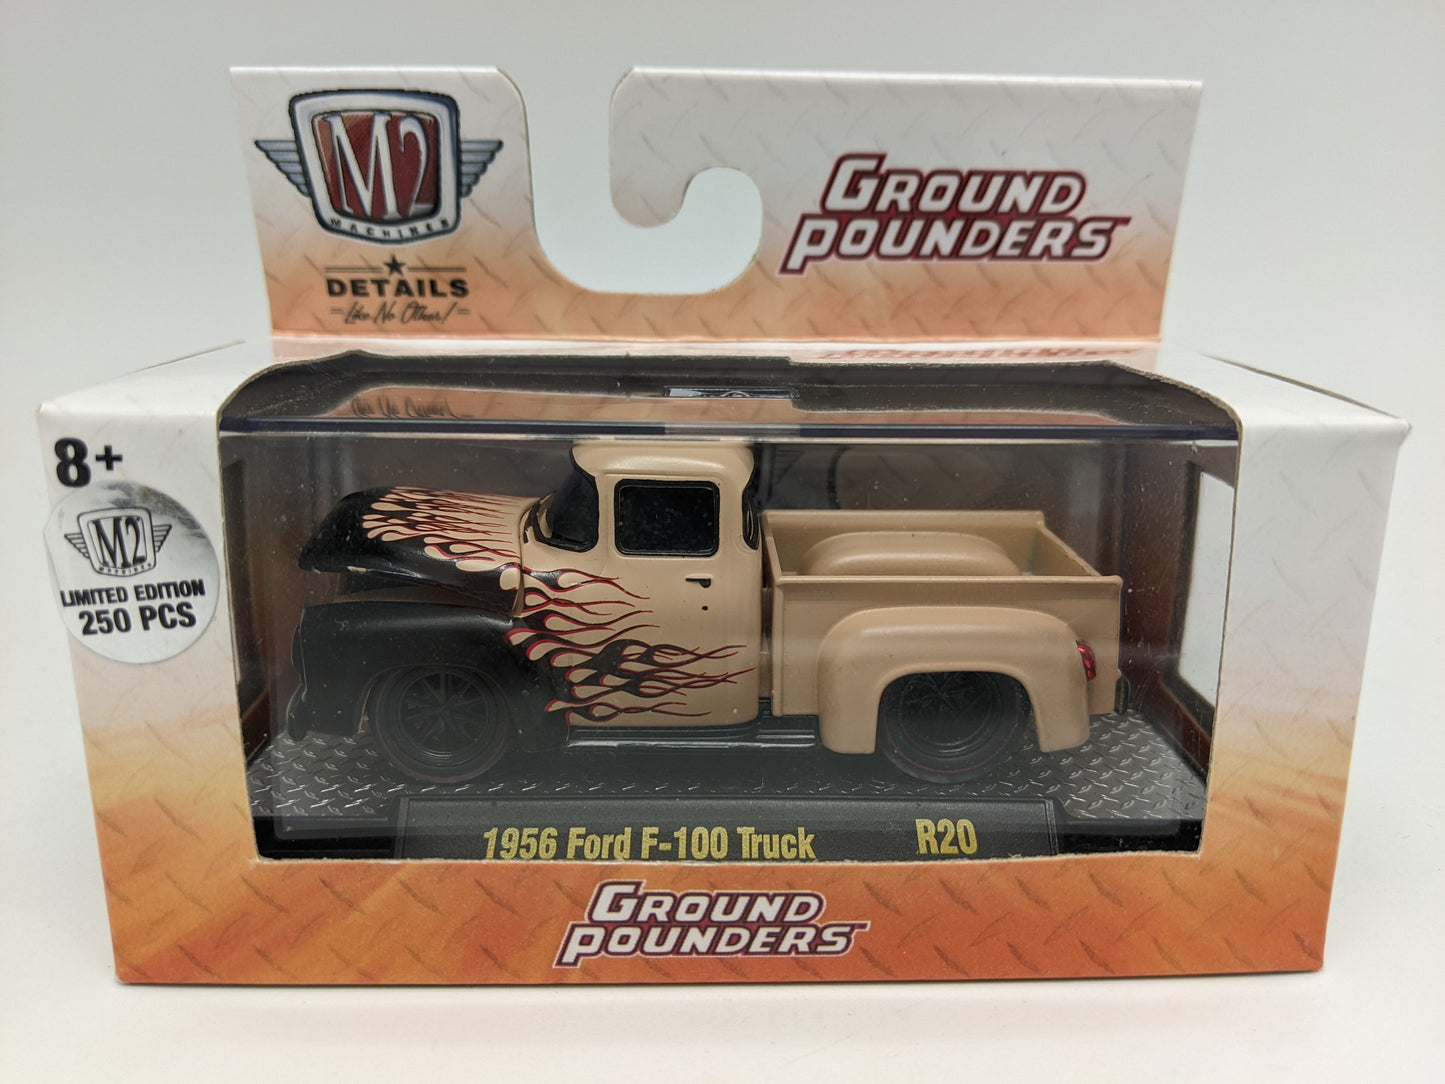 M2 1956 Ford F-100 Truck - Ground Pounds - CHASE